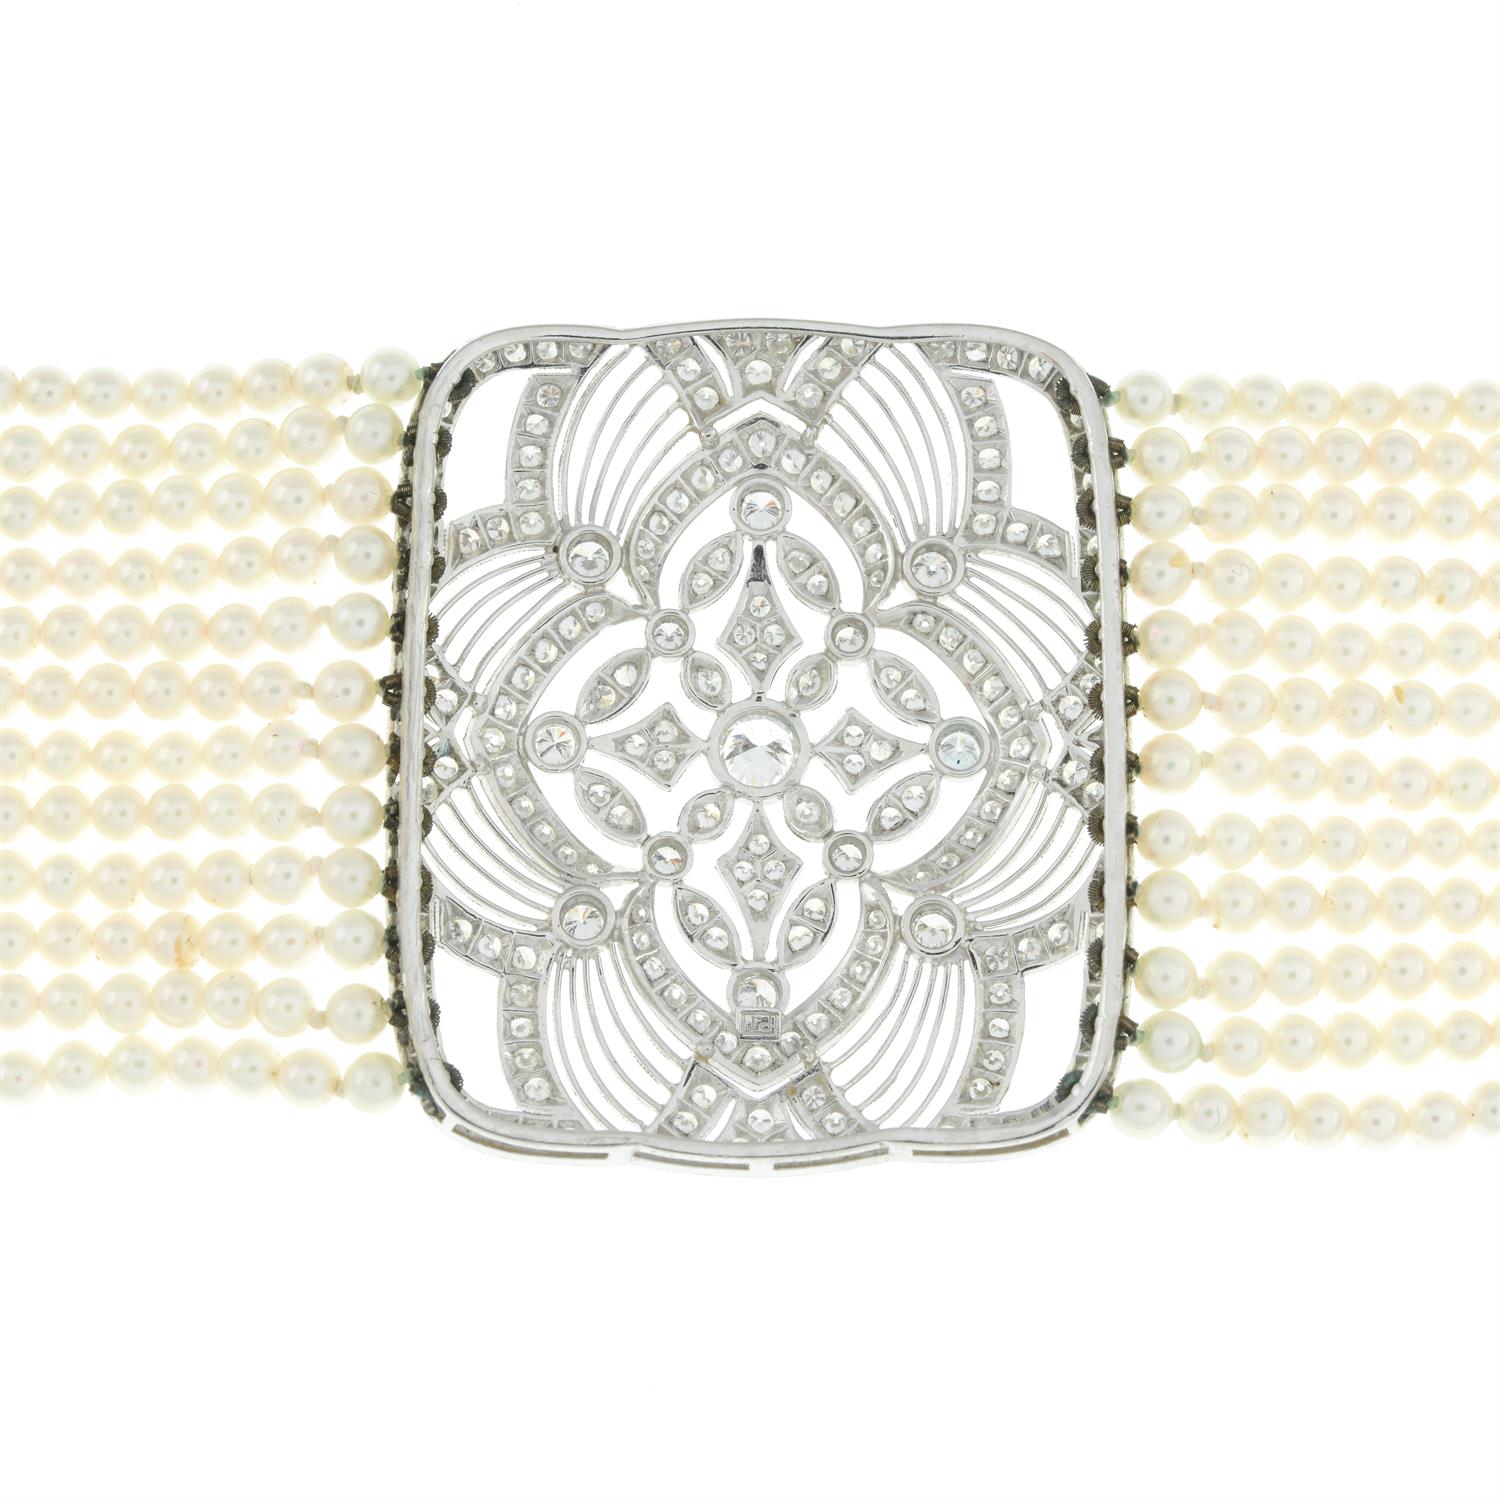 Seed pearl and diamond choker necklace, by Adler - Bild 6 aus 6